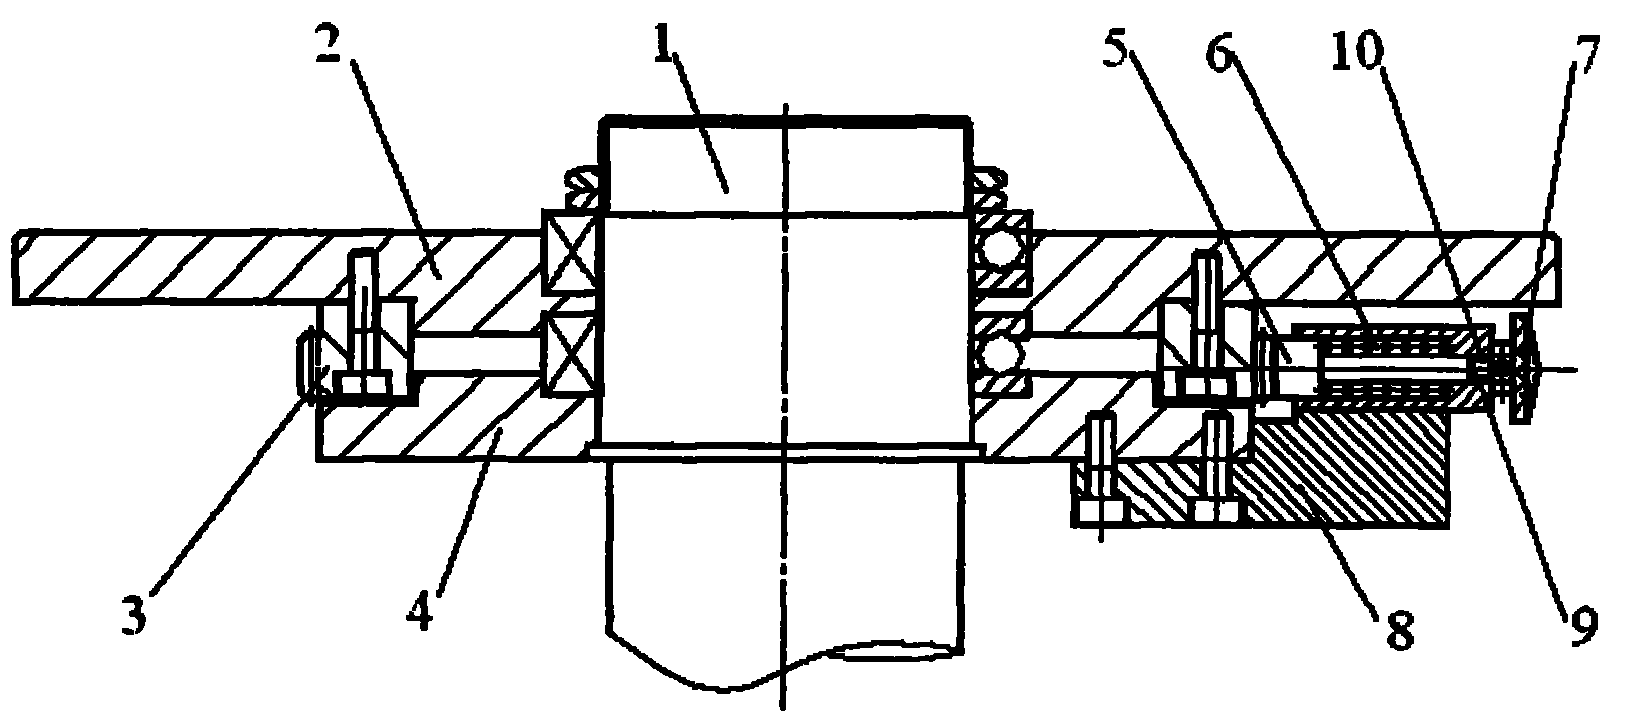 Ratchet mechanism capable of changing direction of rotation